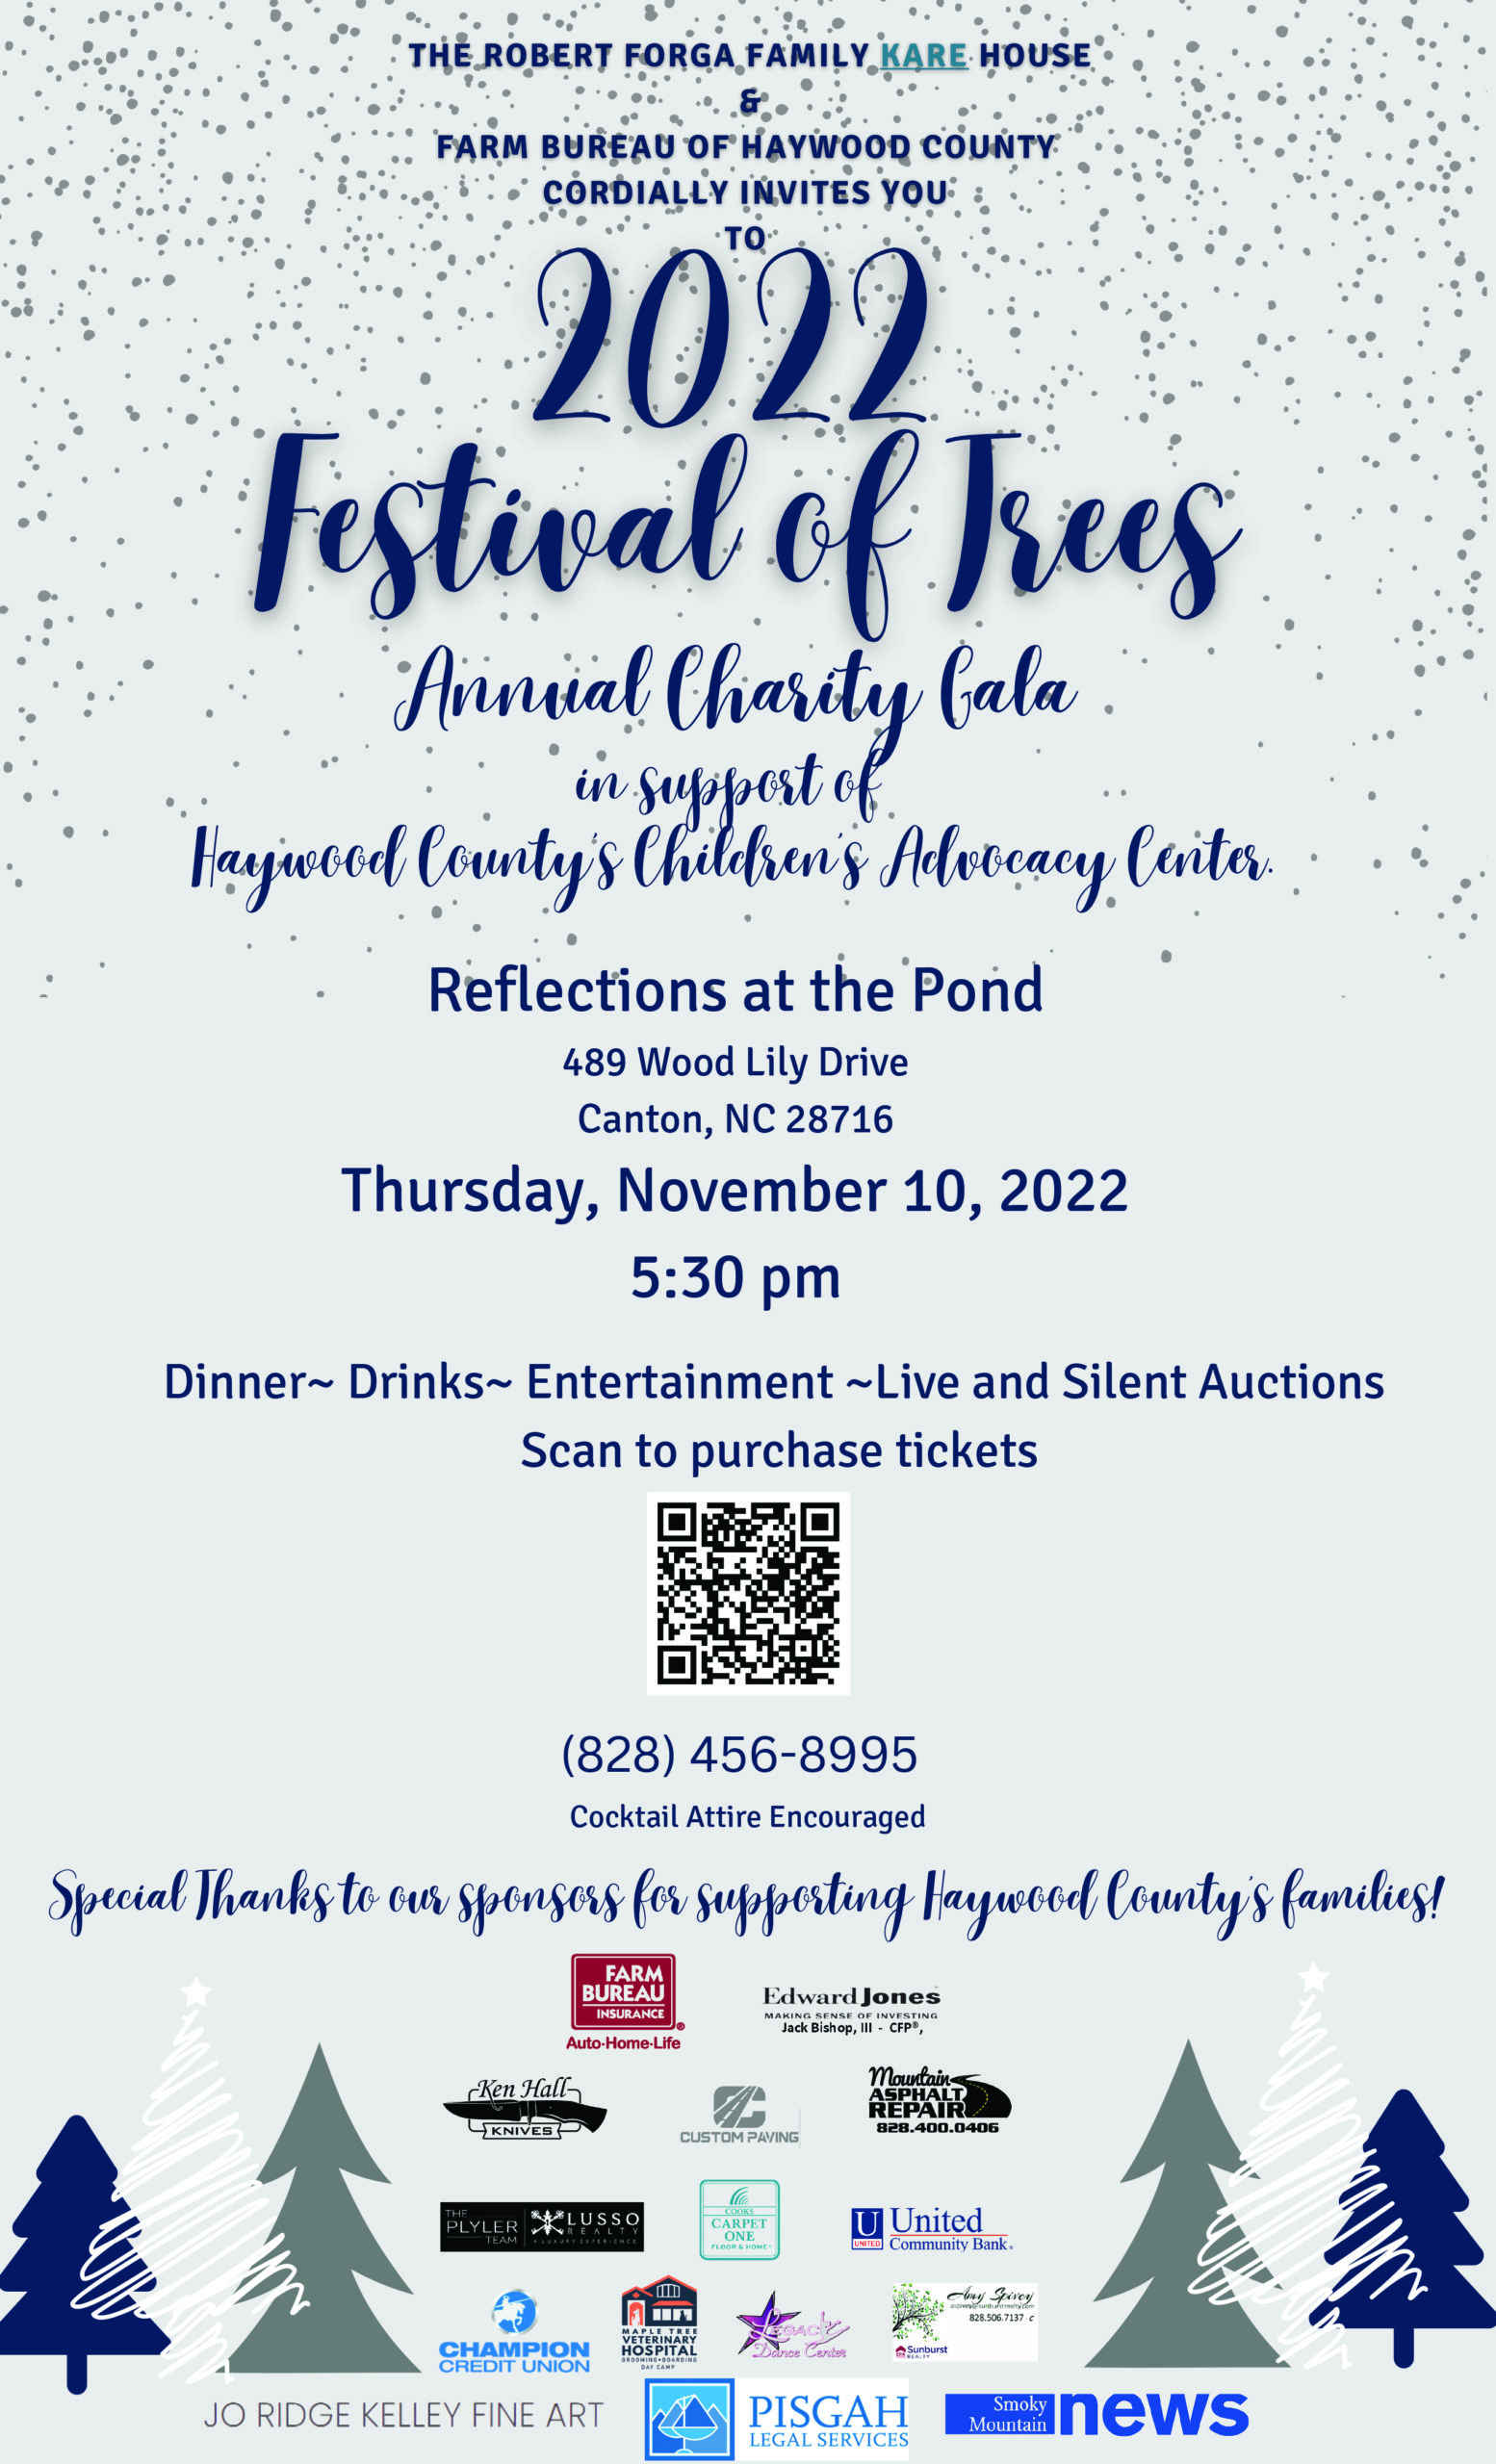 Festival of trees 2022 annual charity gala poster